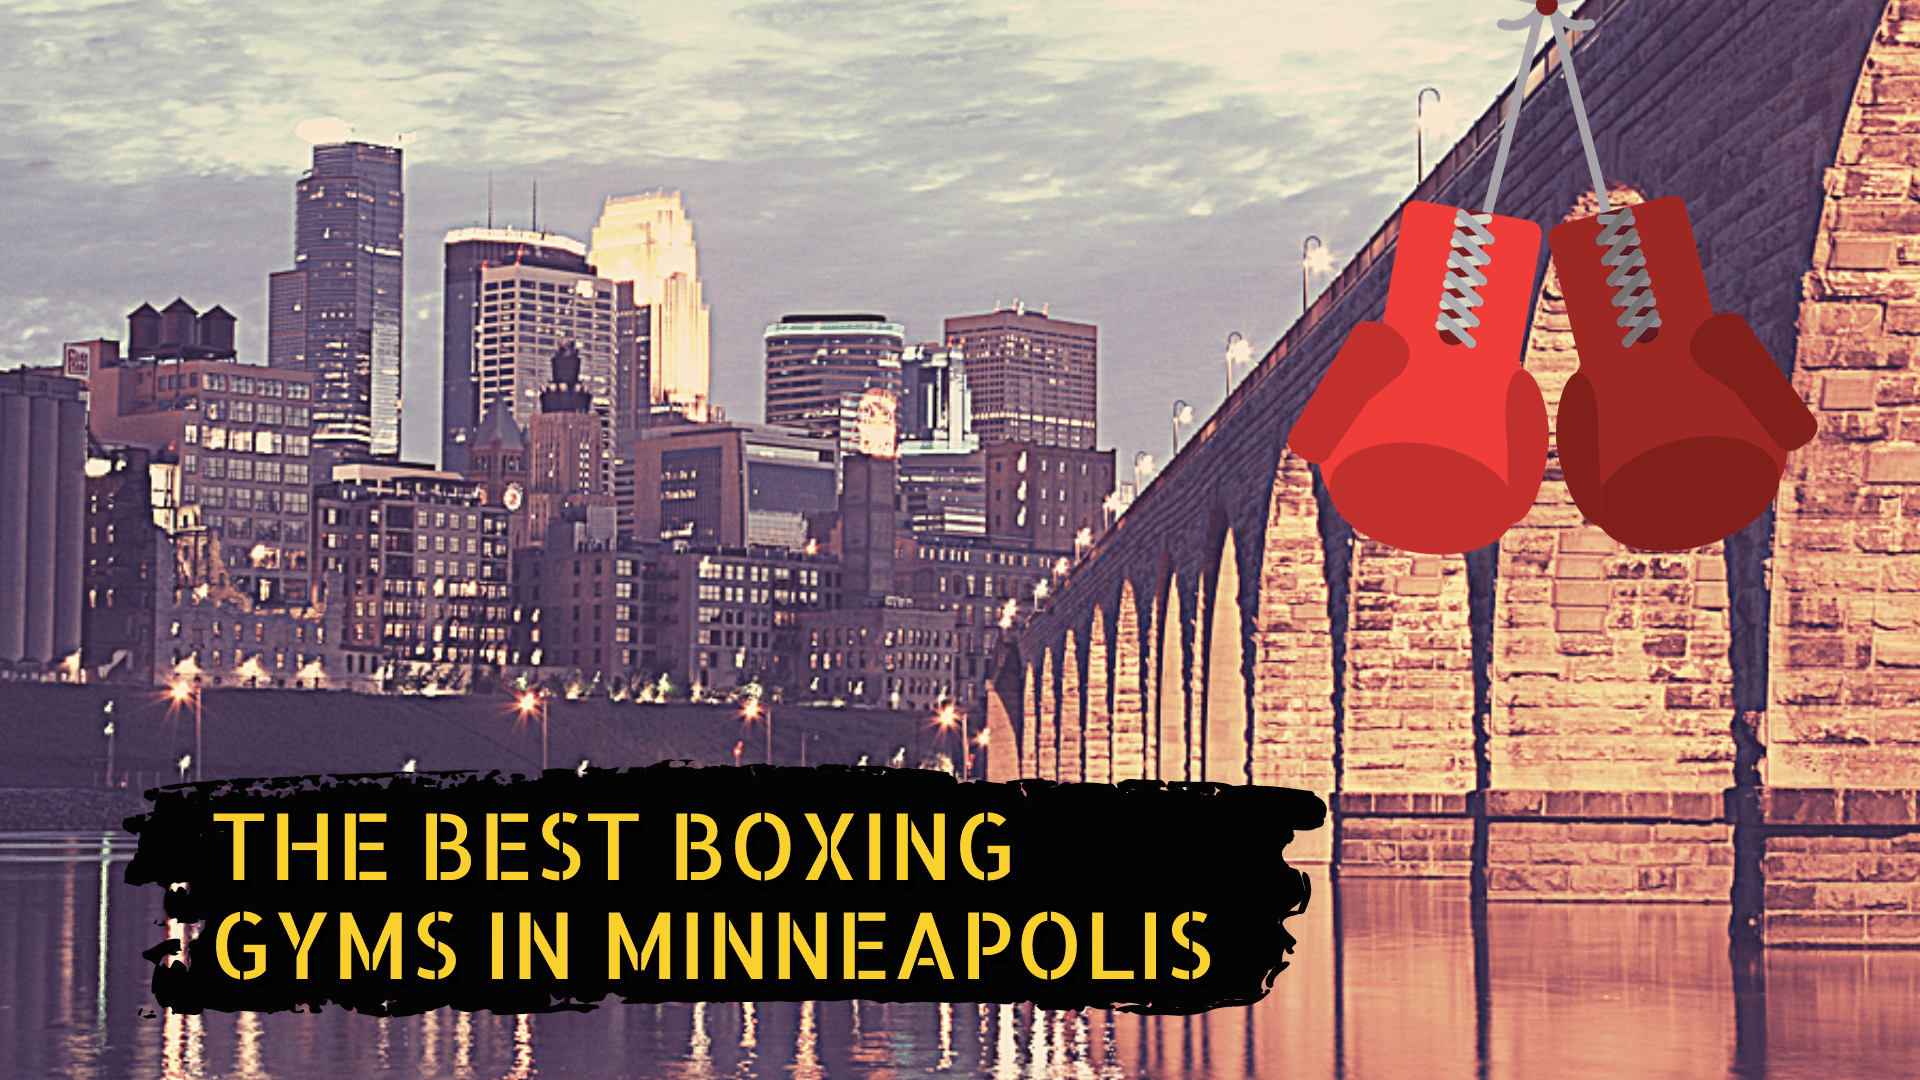 Minneapolis skyline, some boxing gloves, and the title the best boxing gyms in Minneapolis